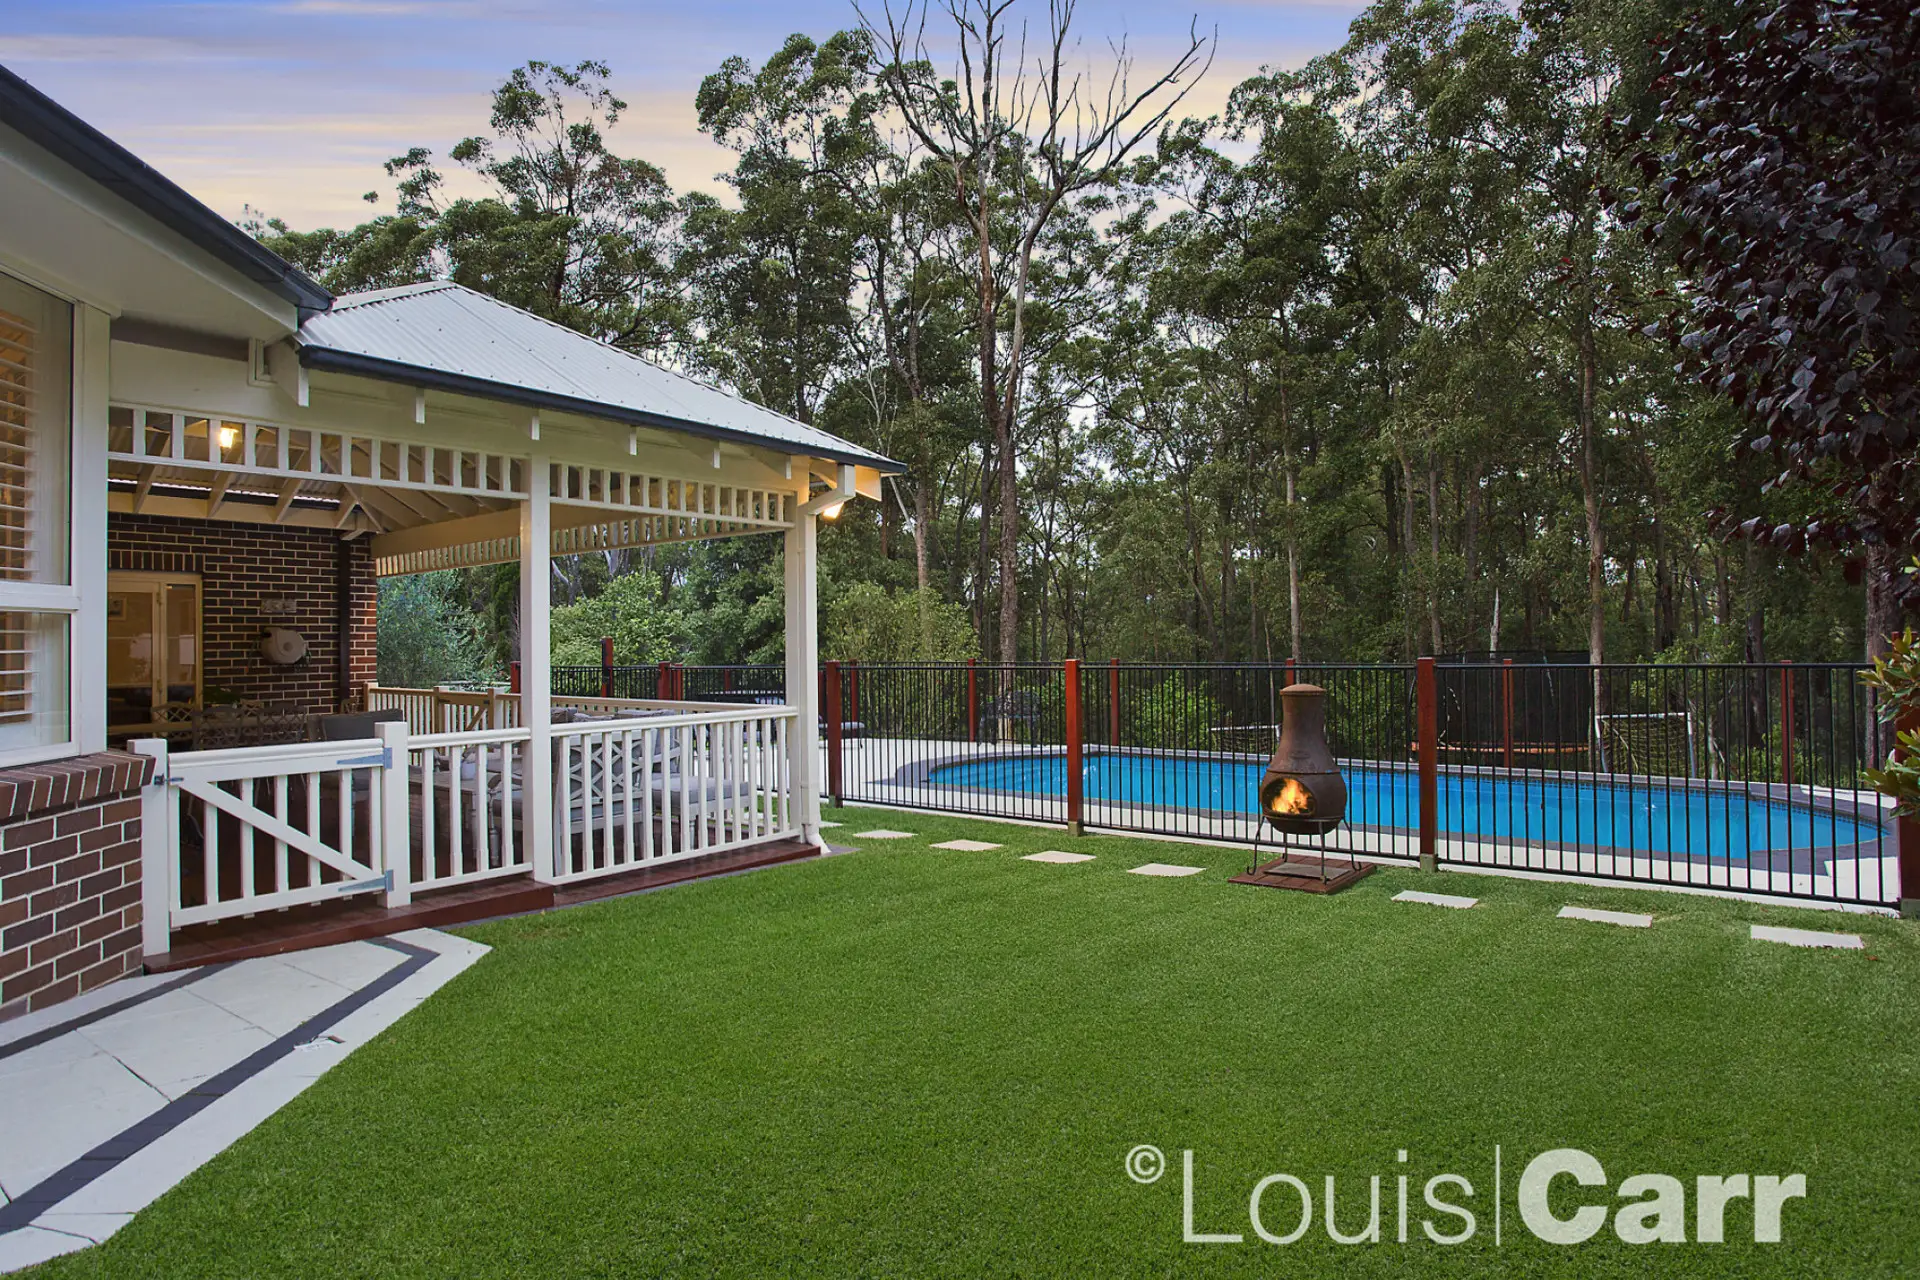 Photo #9: 17 George Muir Close, Baulkham Hills - Sold by Louis Carr Real Estate